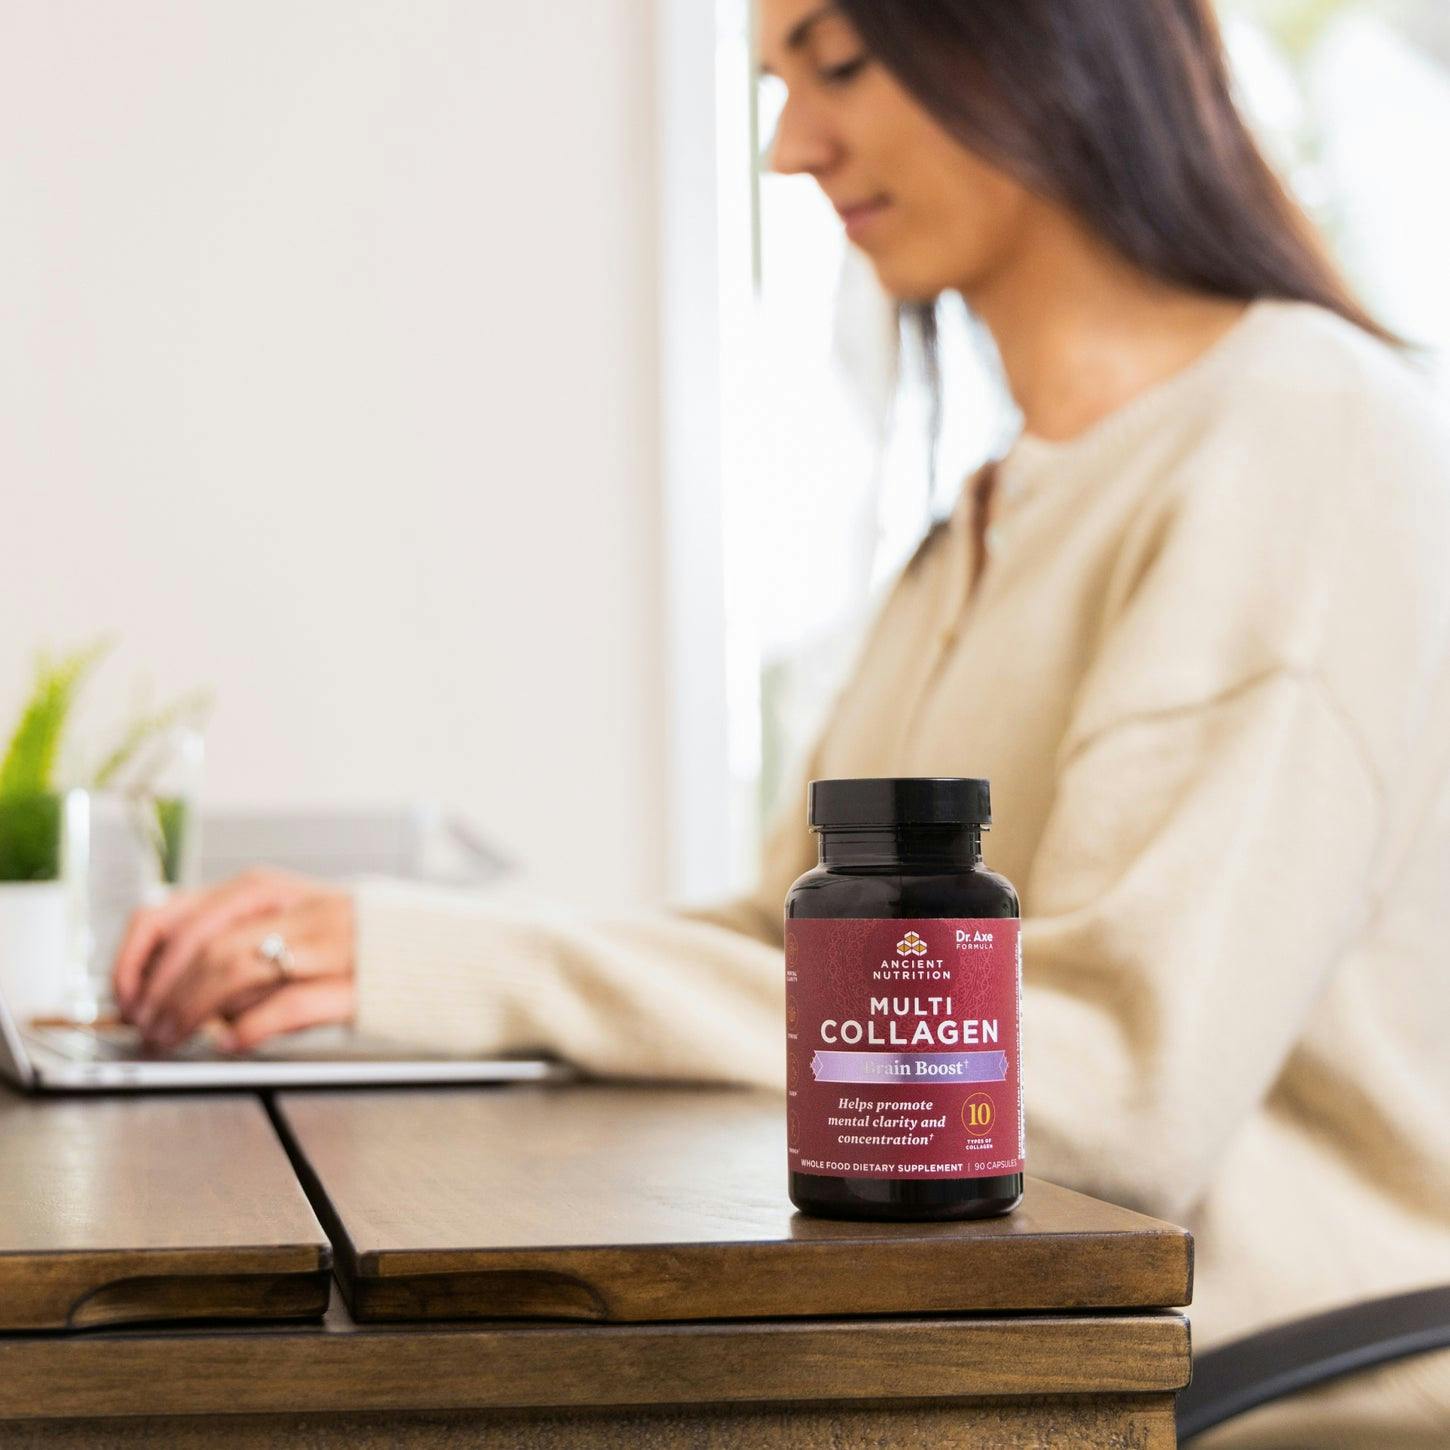 Multi collagen brain boost capsules on desk with woman at computer